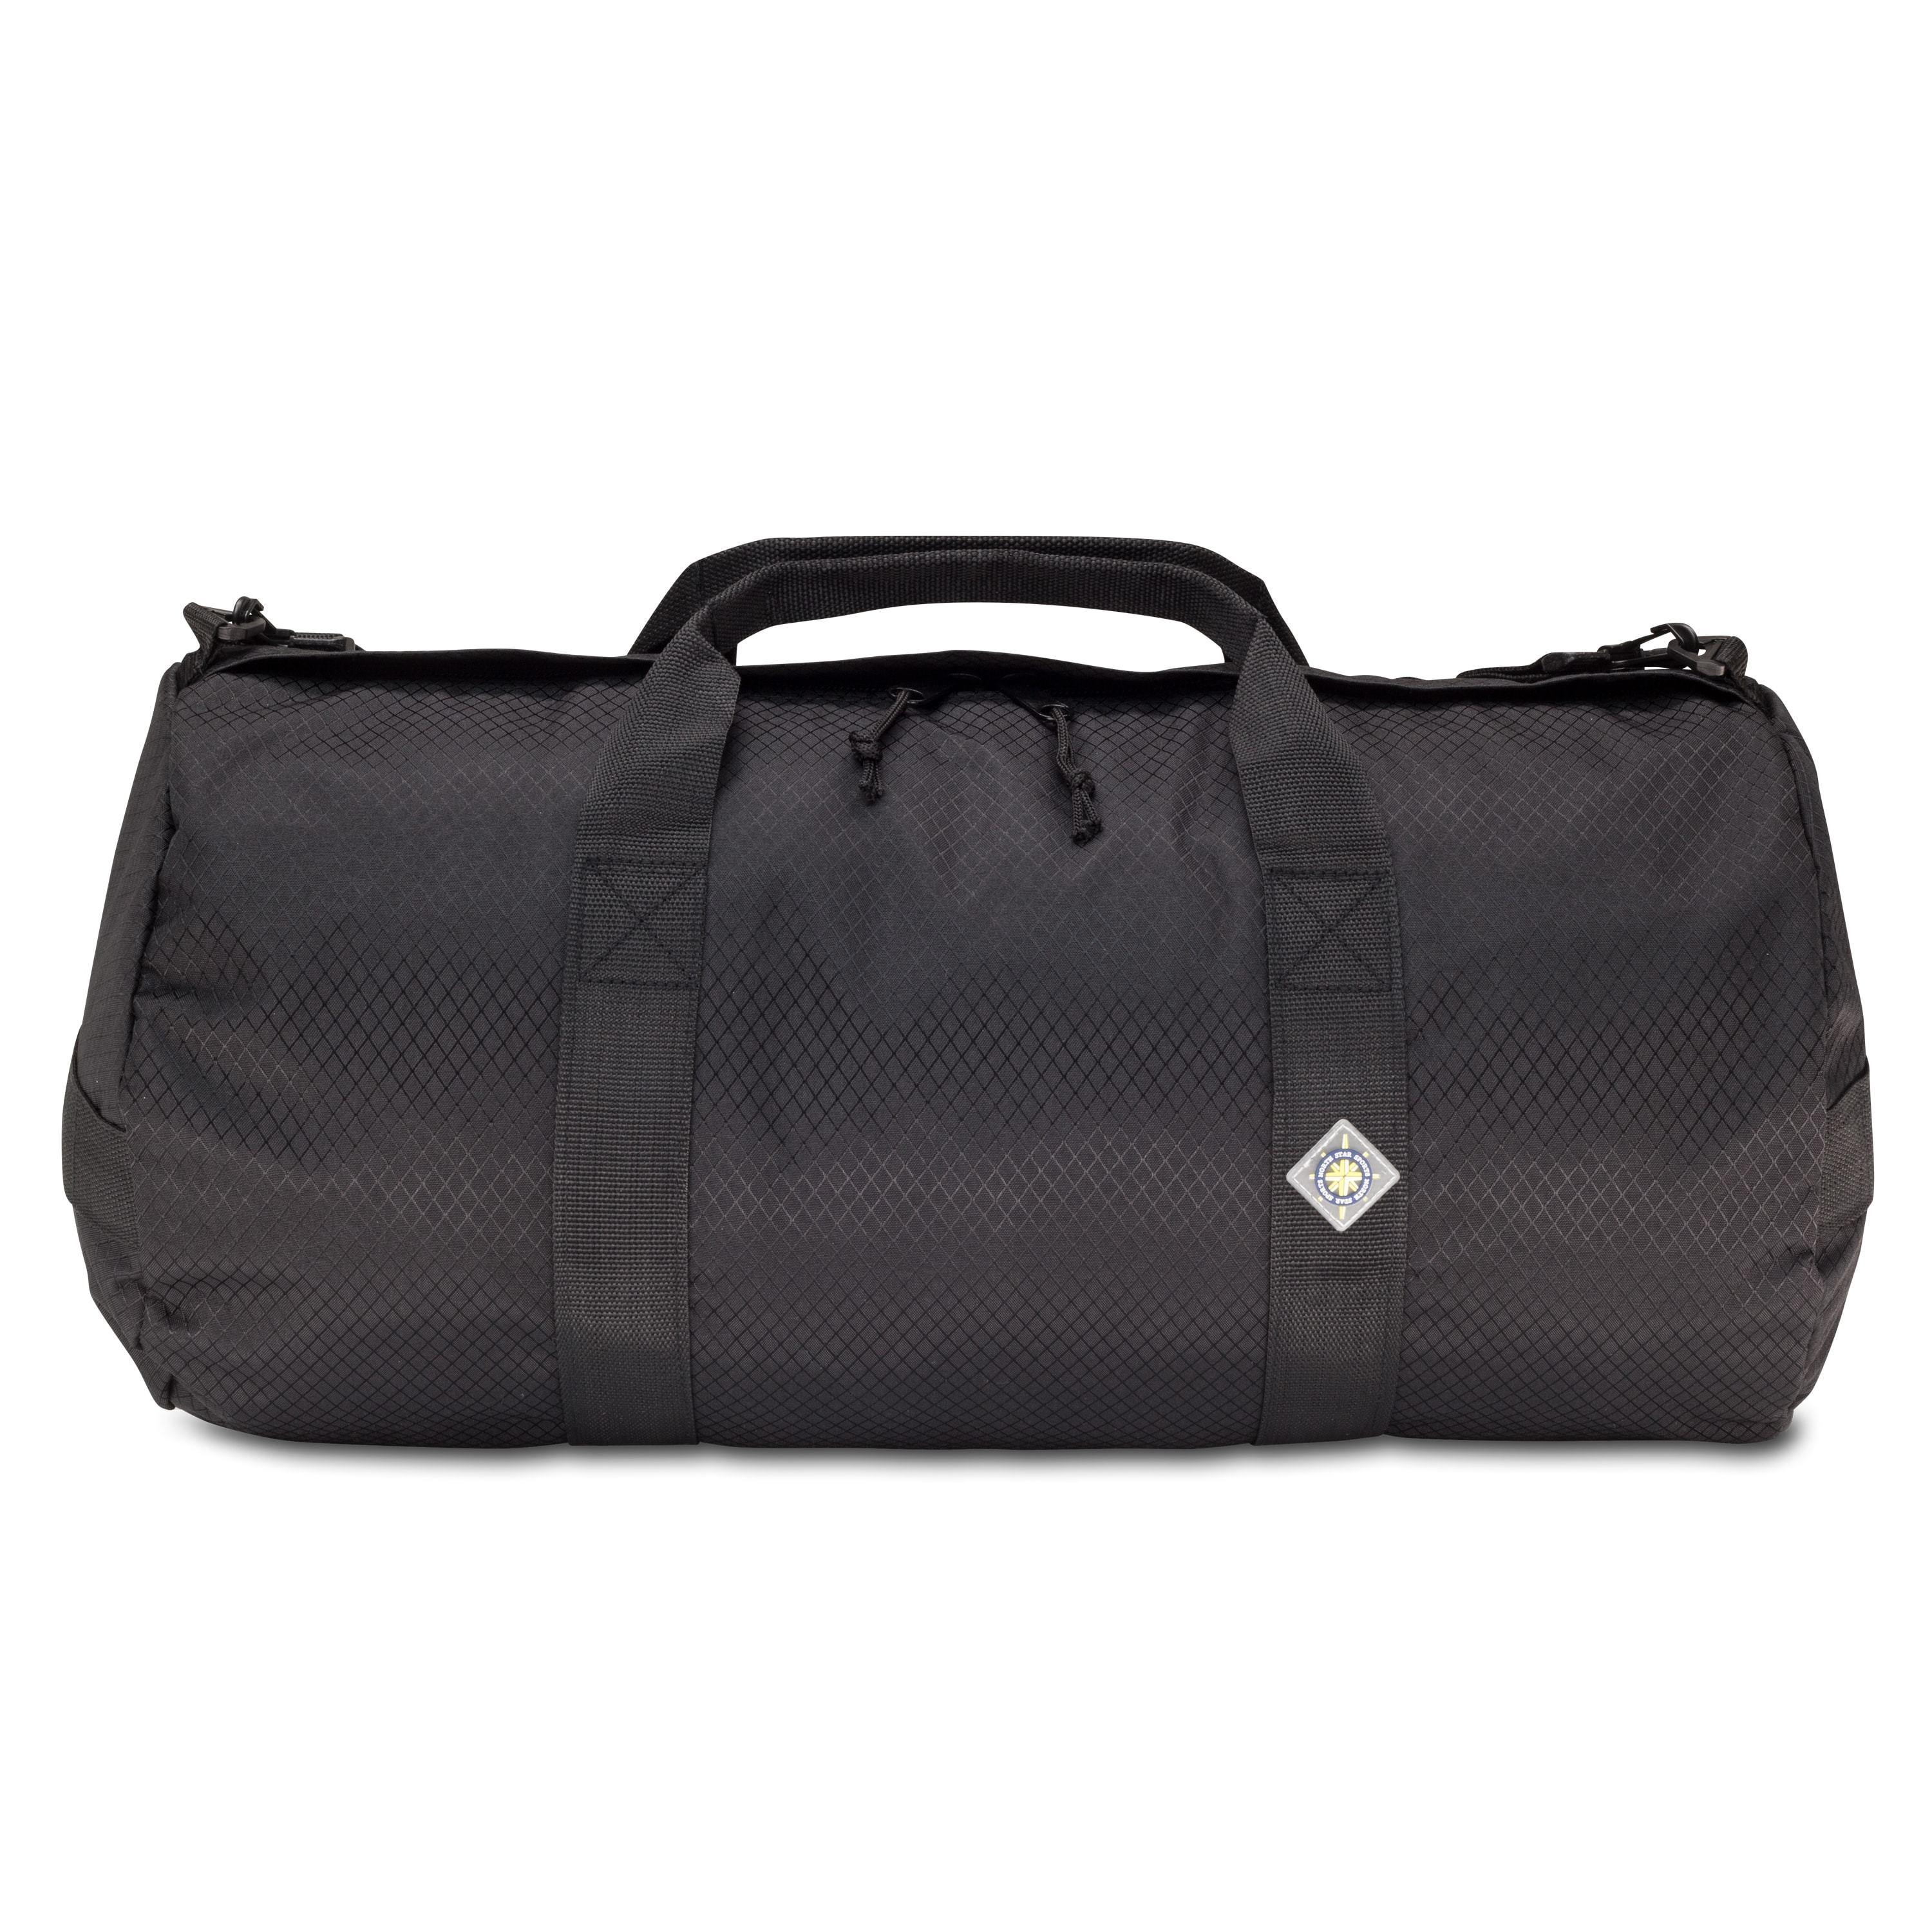 SD1224 Standard Duffle (44L) by Northstar Bags